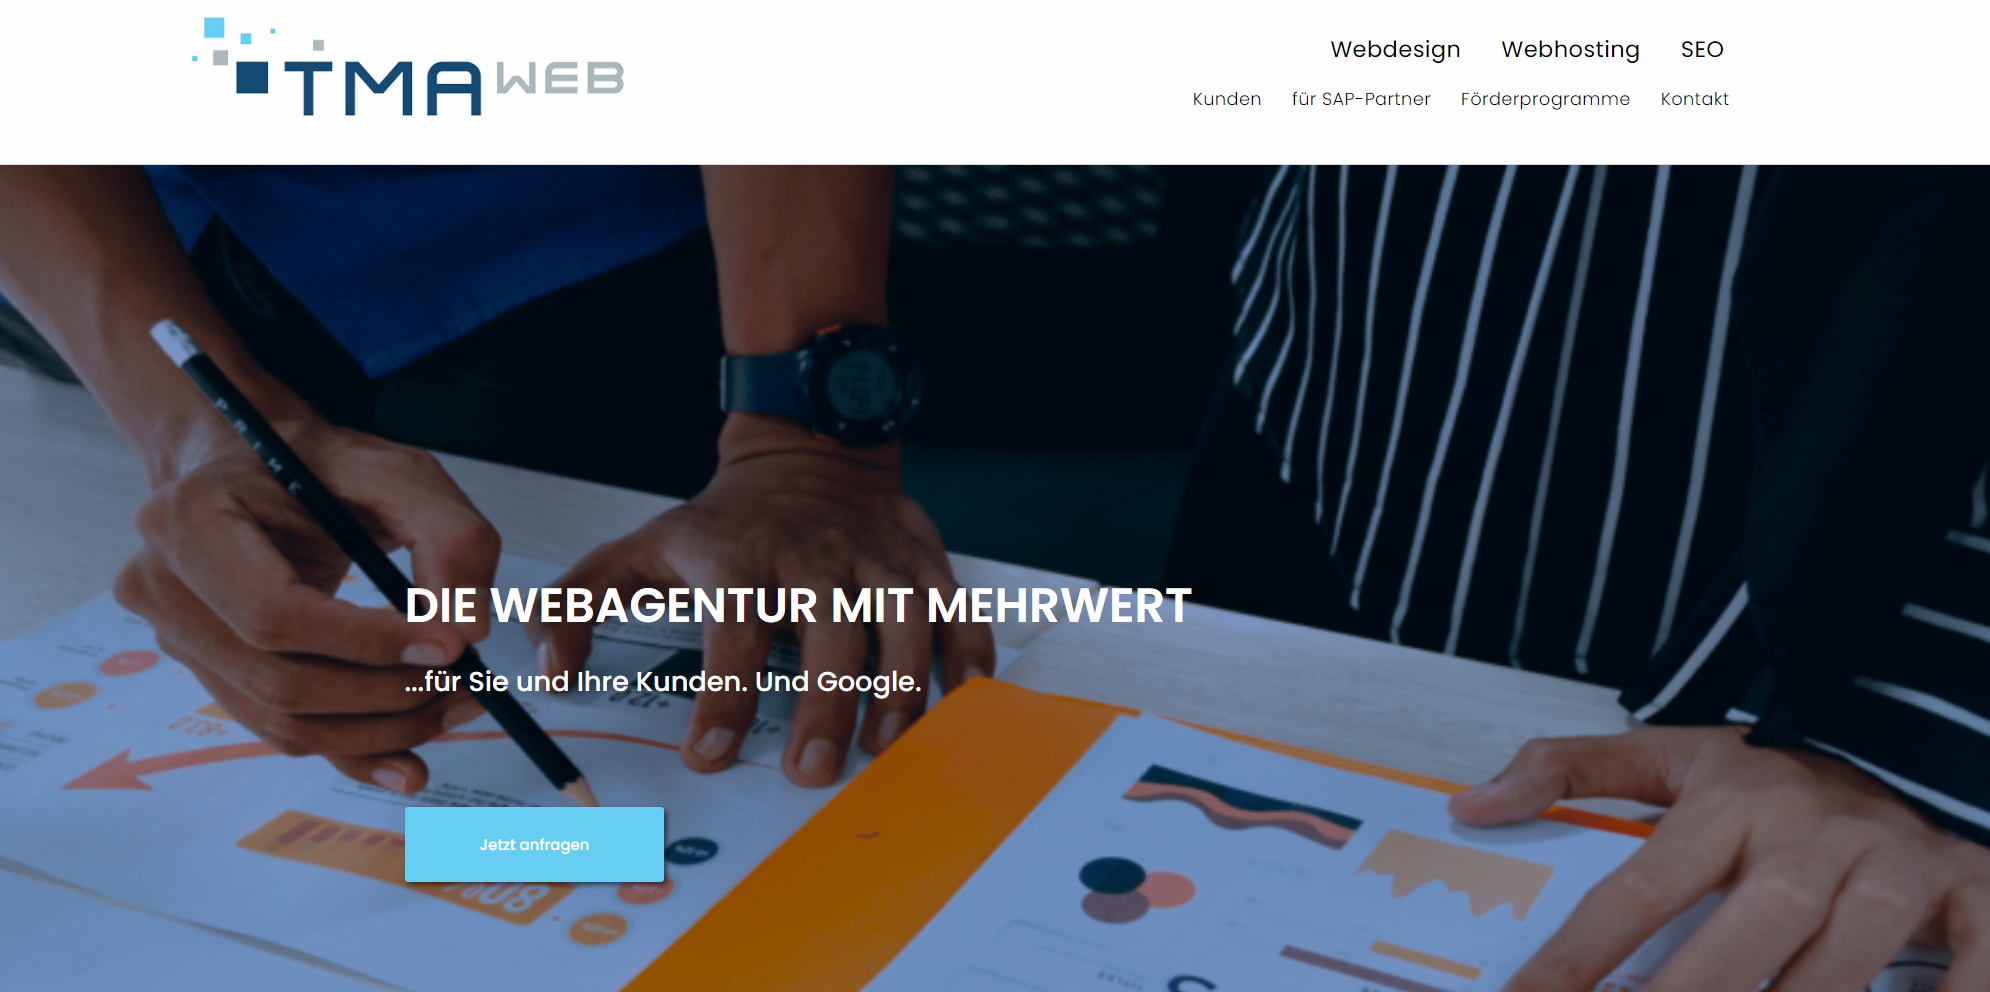 TMA-WEB / agency from Oftersheim / Background